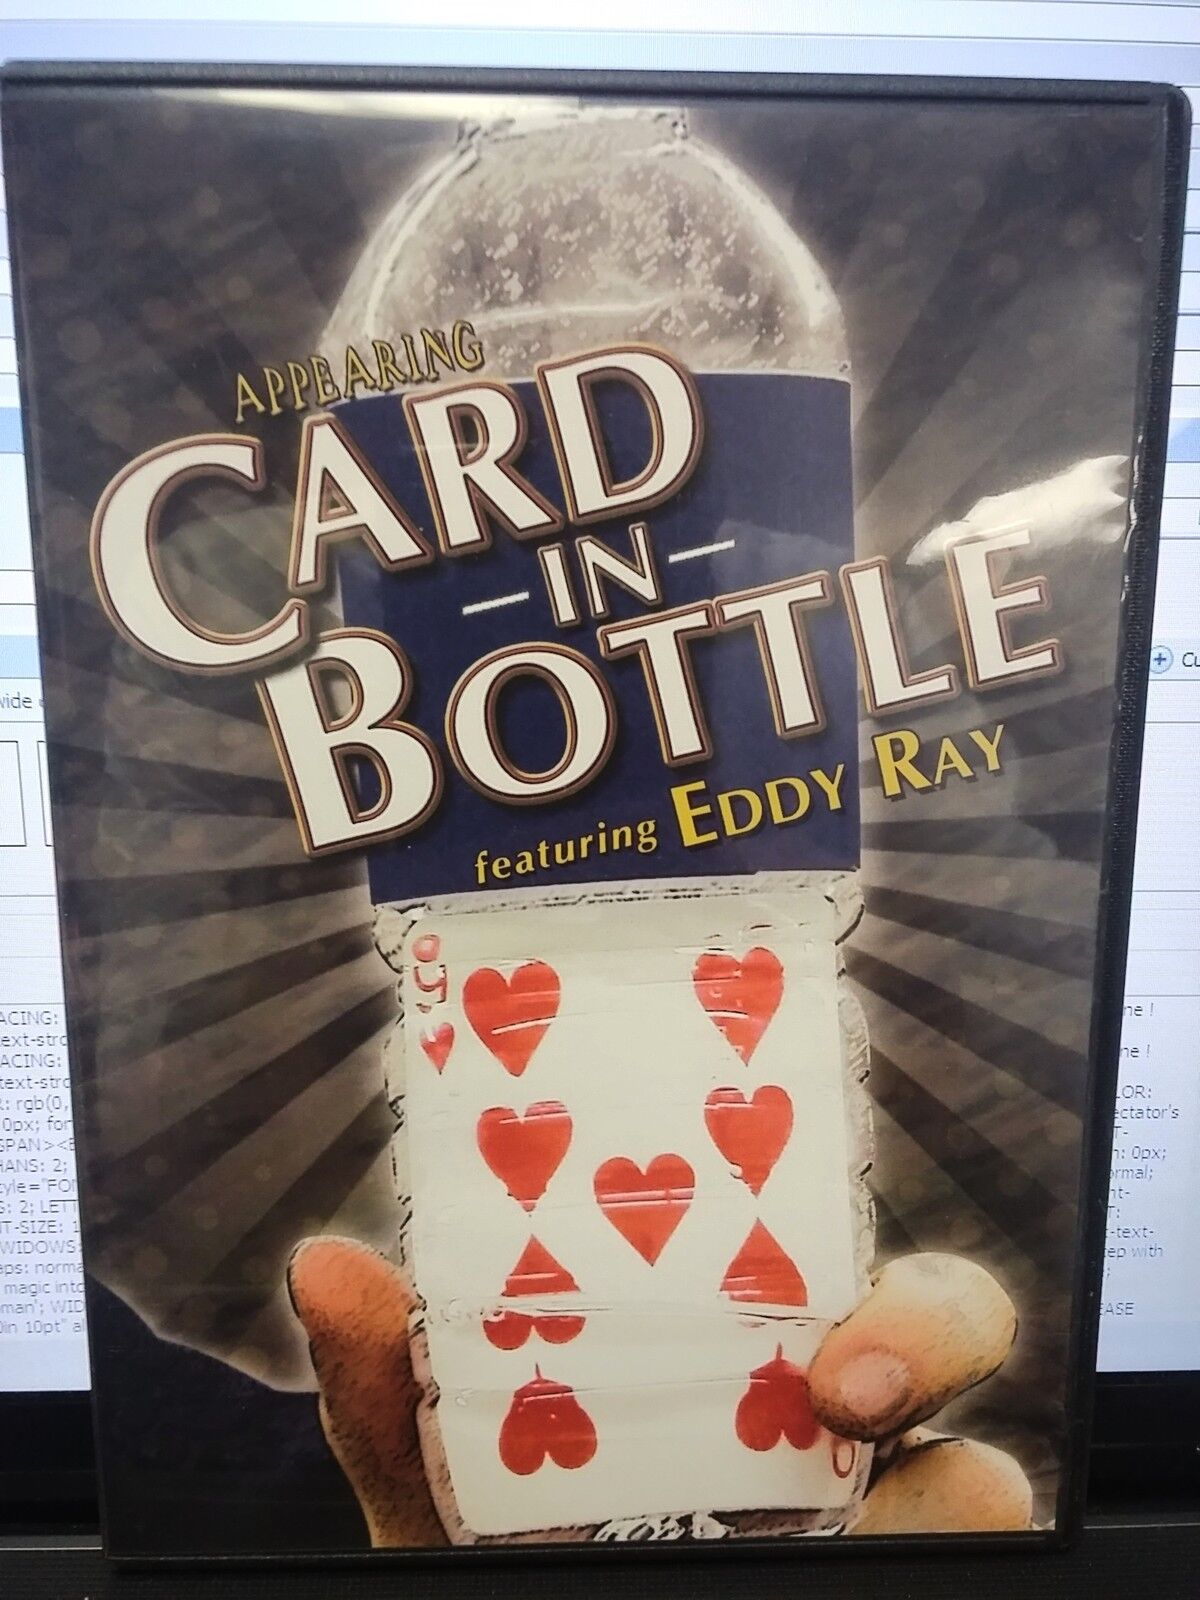 APPEARING CARD IN BOTTLE DVD FEATURING EDDY RAY